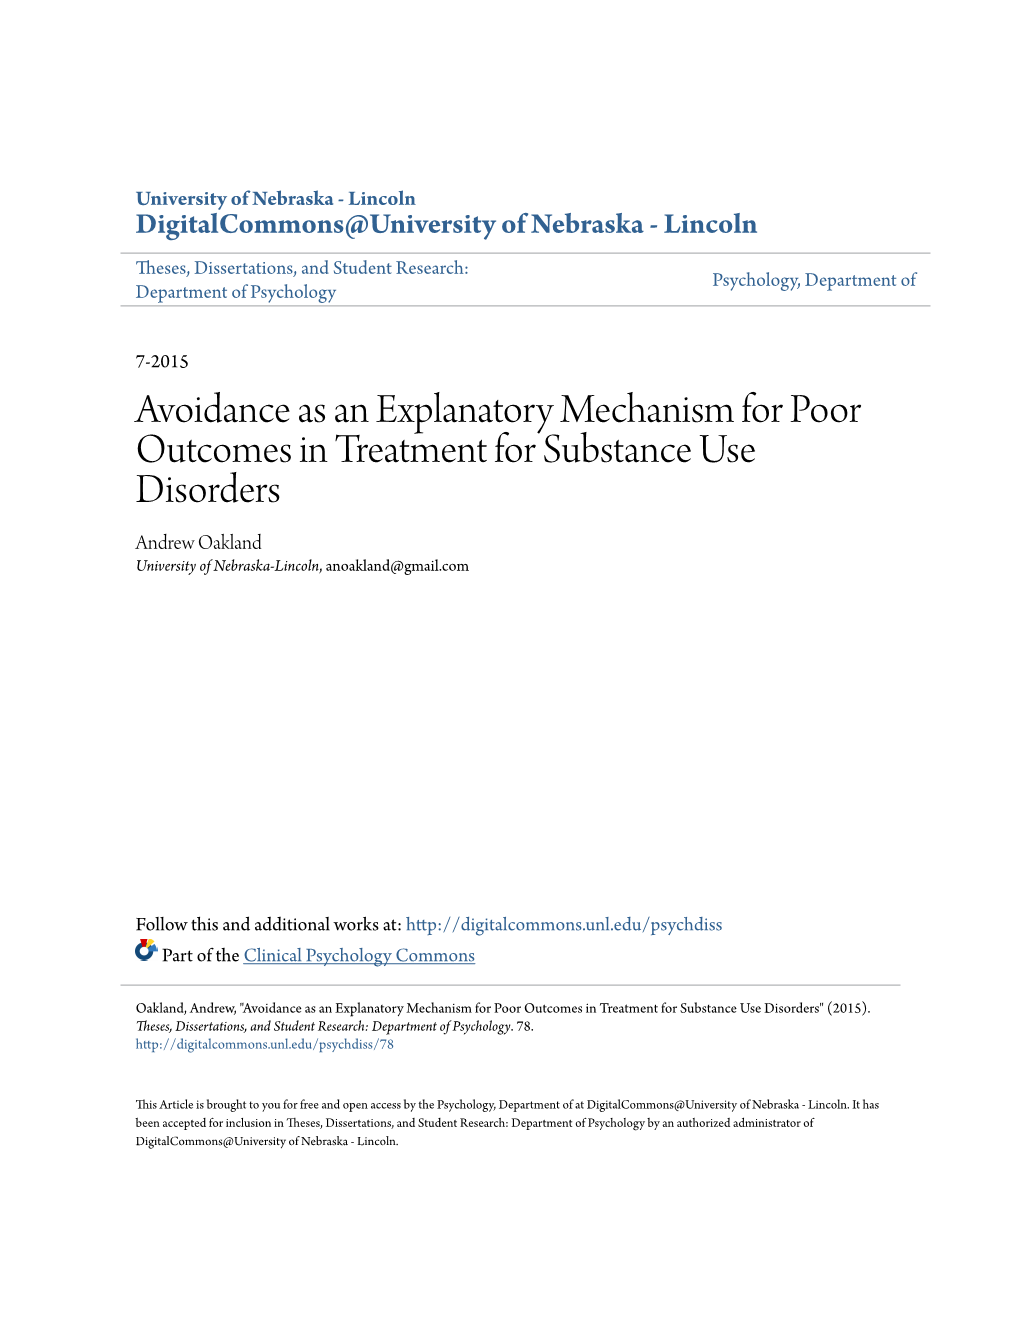 Avoidance As an Explanatory Mechanism for Poor Outcomes in Treatment for Substance Use Disorders Andrew Oakland University of Nebraska-Lincoln, Anoakland@Gmail.Com